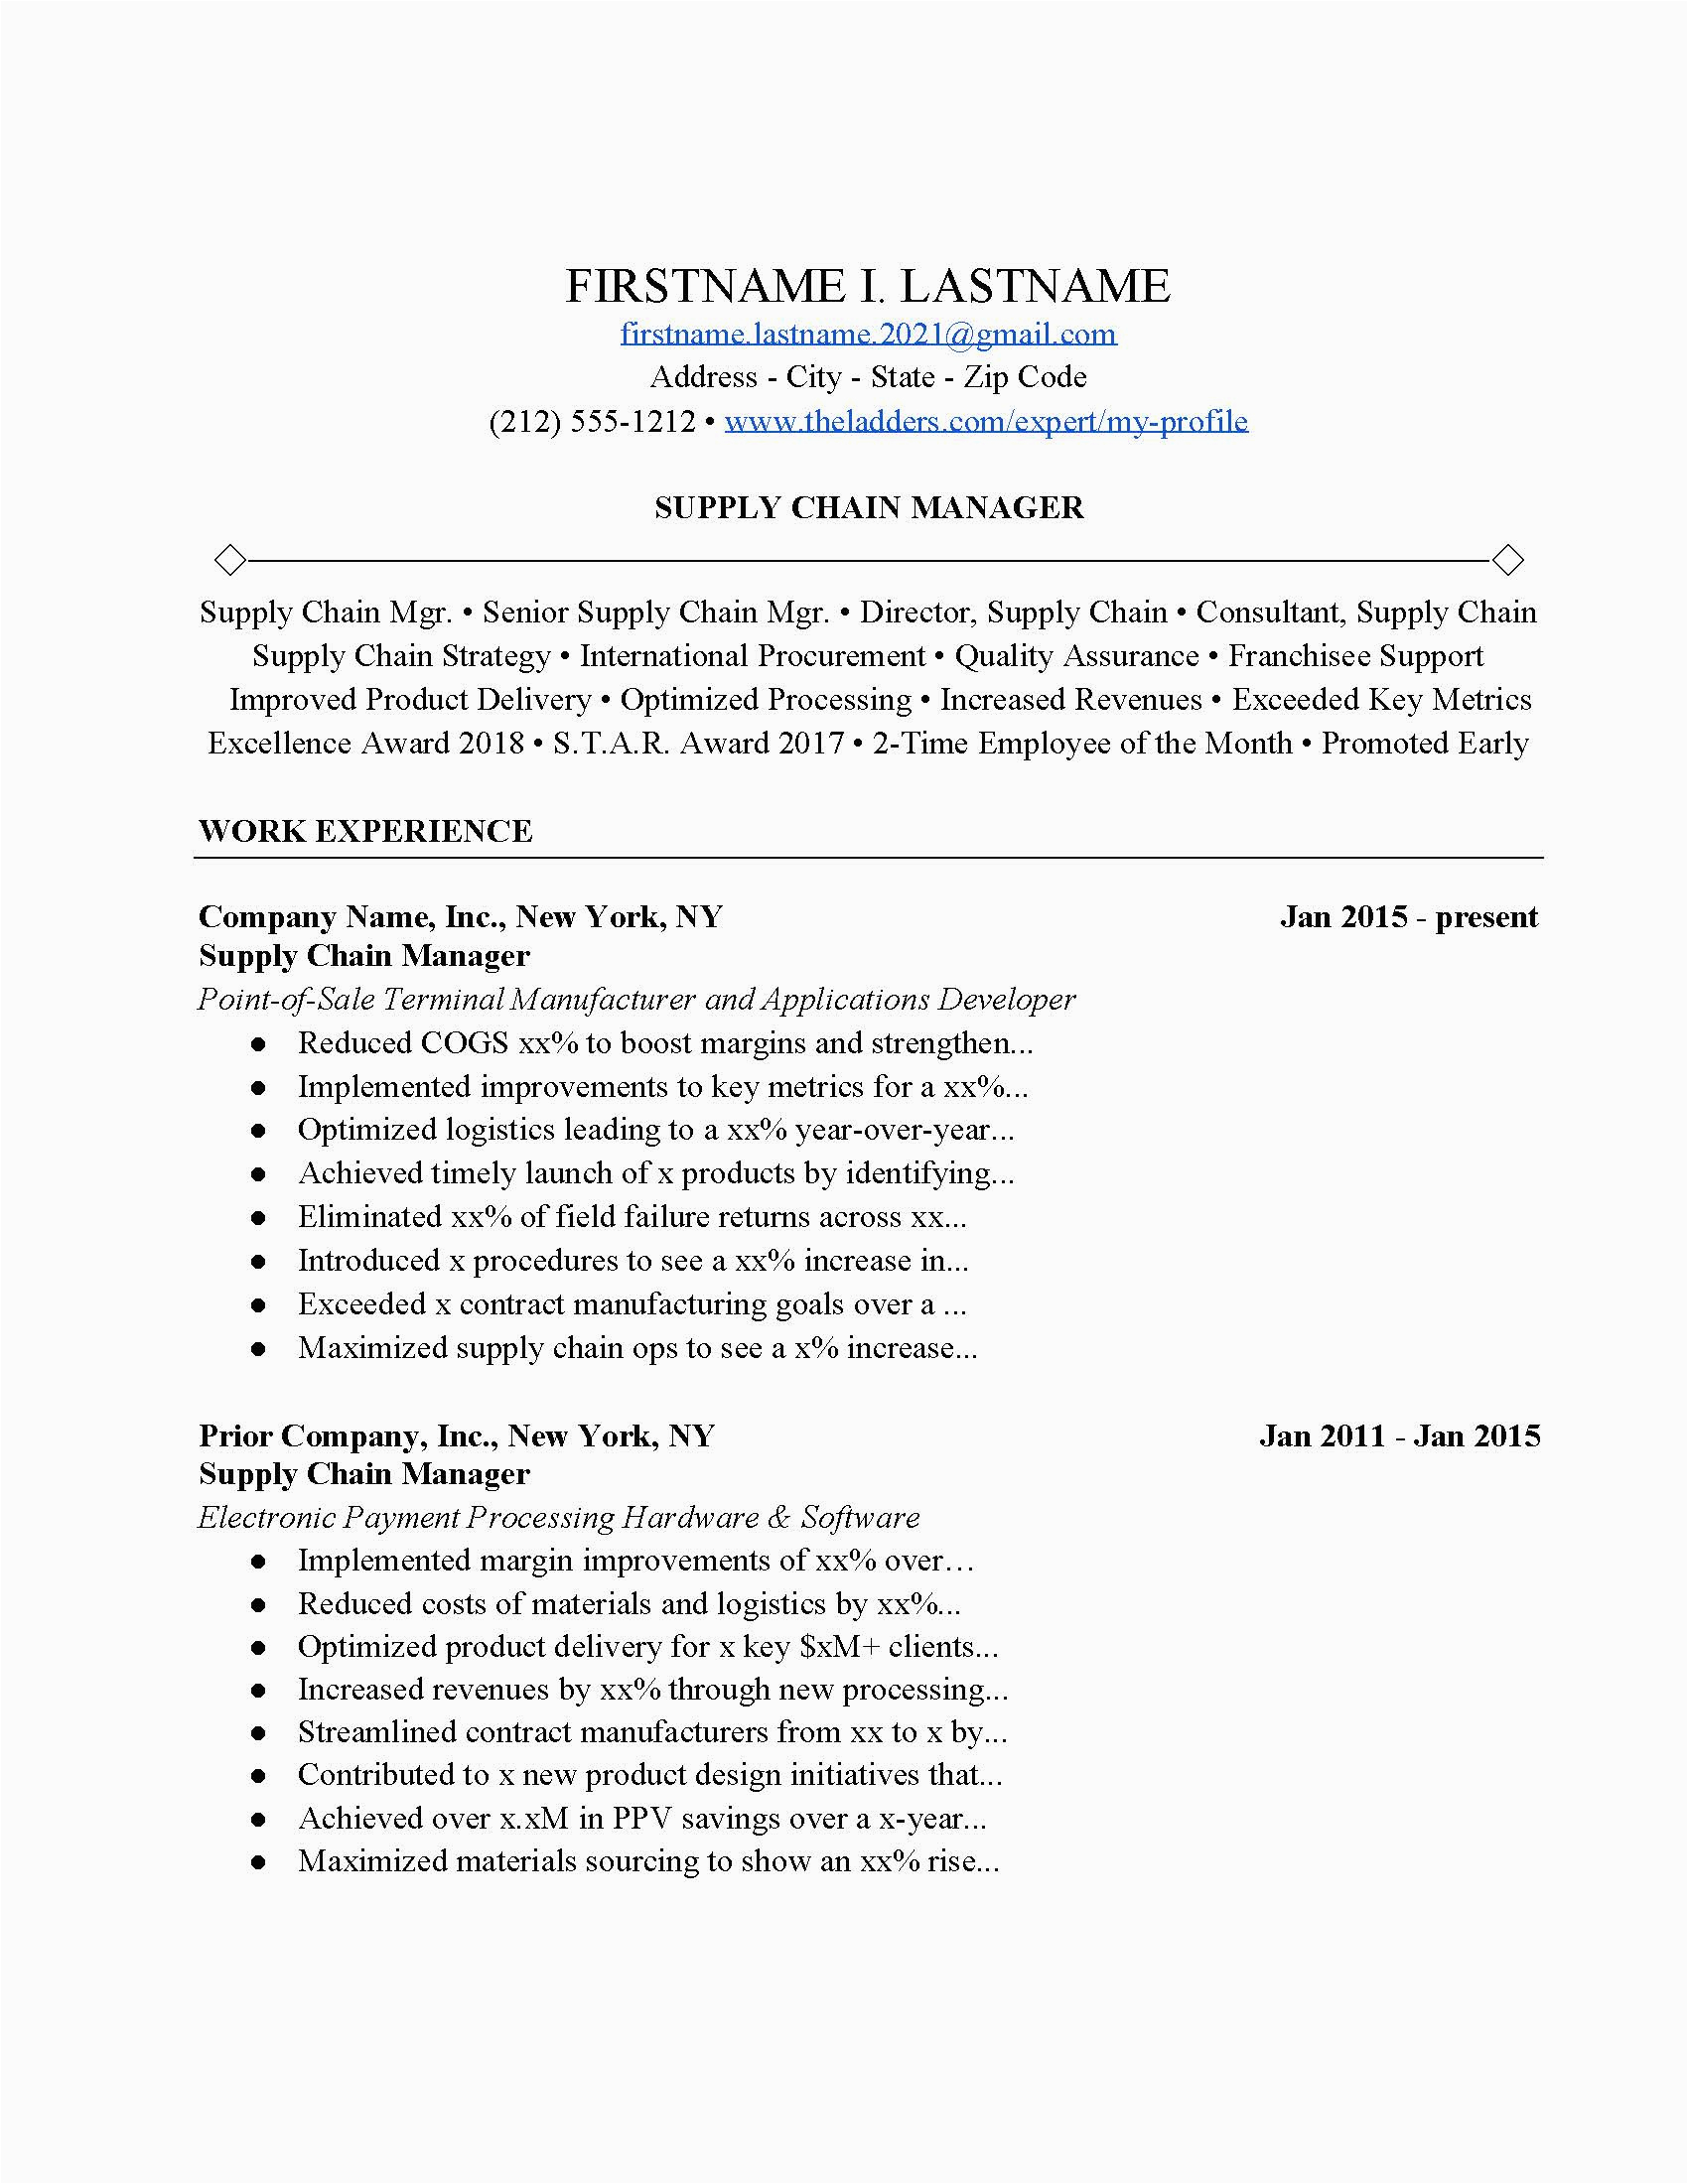 Sample Resume for Logistics and Supply Chain Management Supply Chain Manager Resume Example